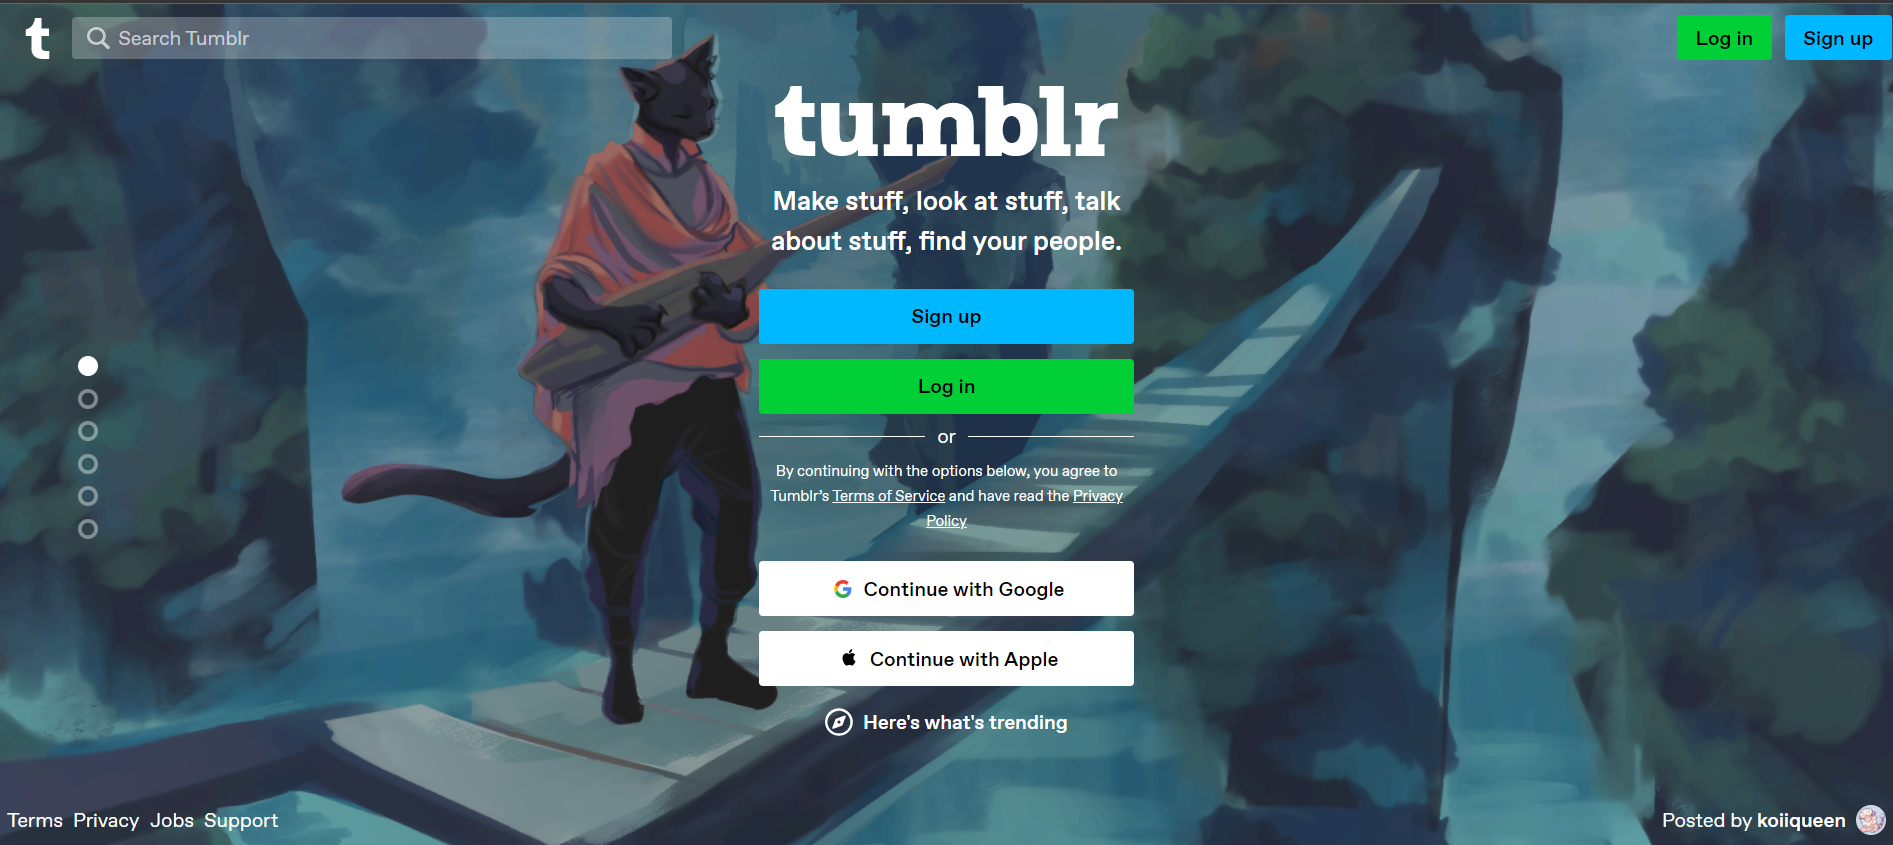 tumblr : How To Block Or Unblock Someone On Tumblr